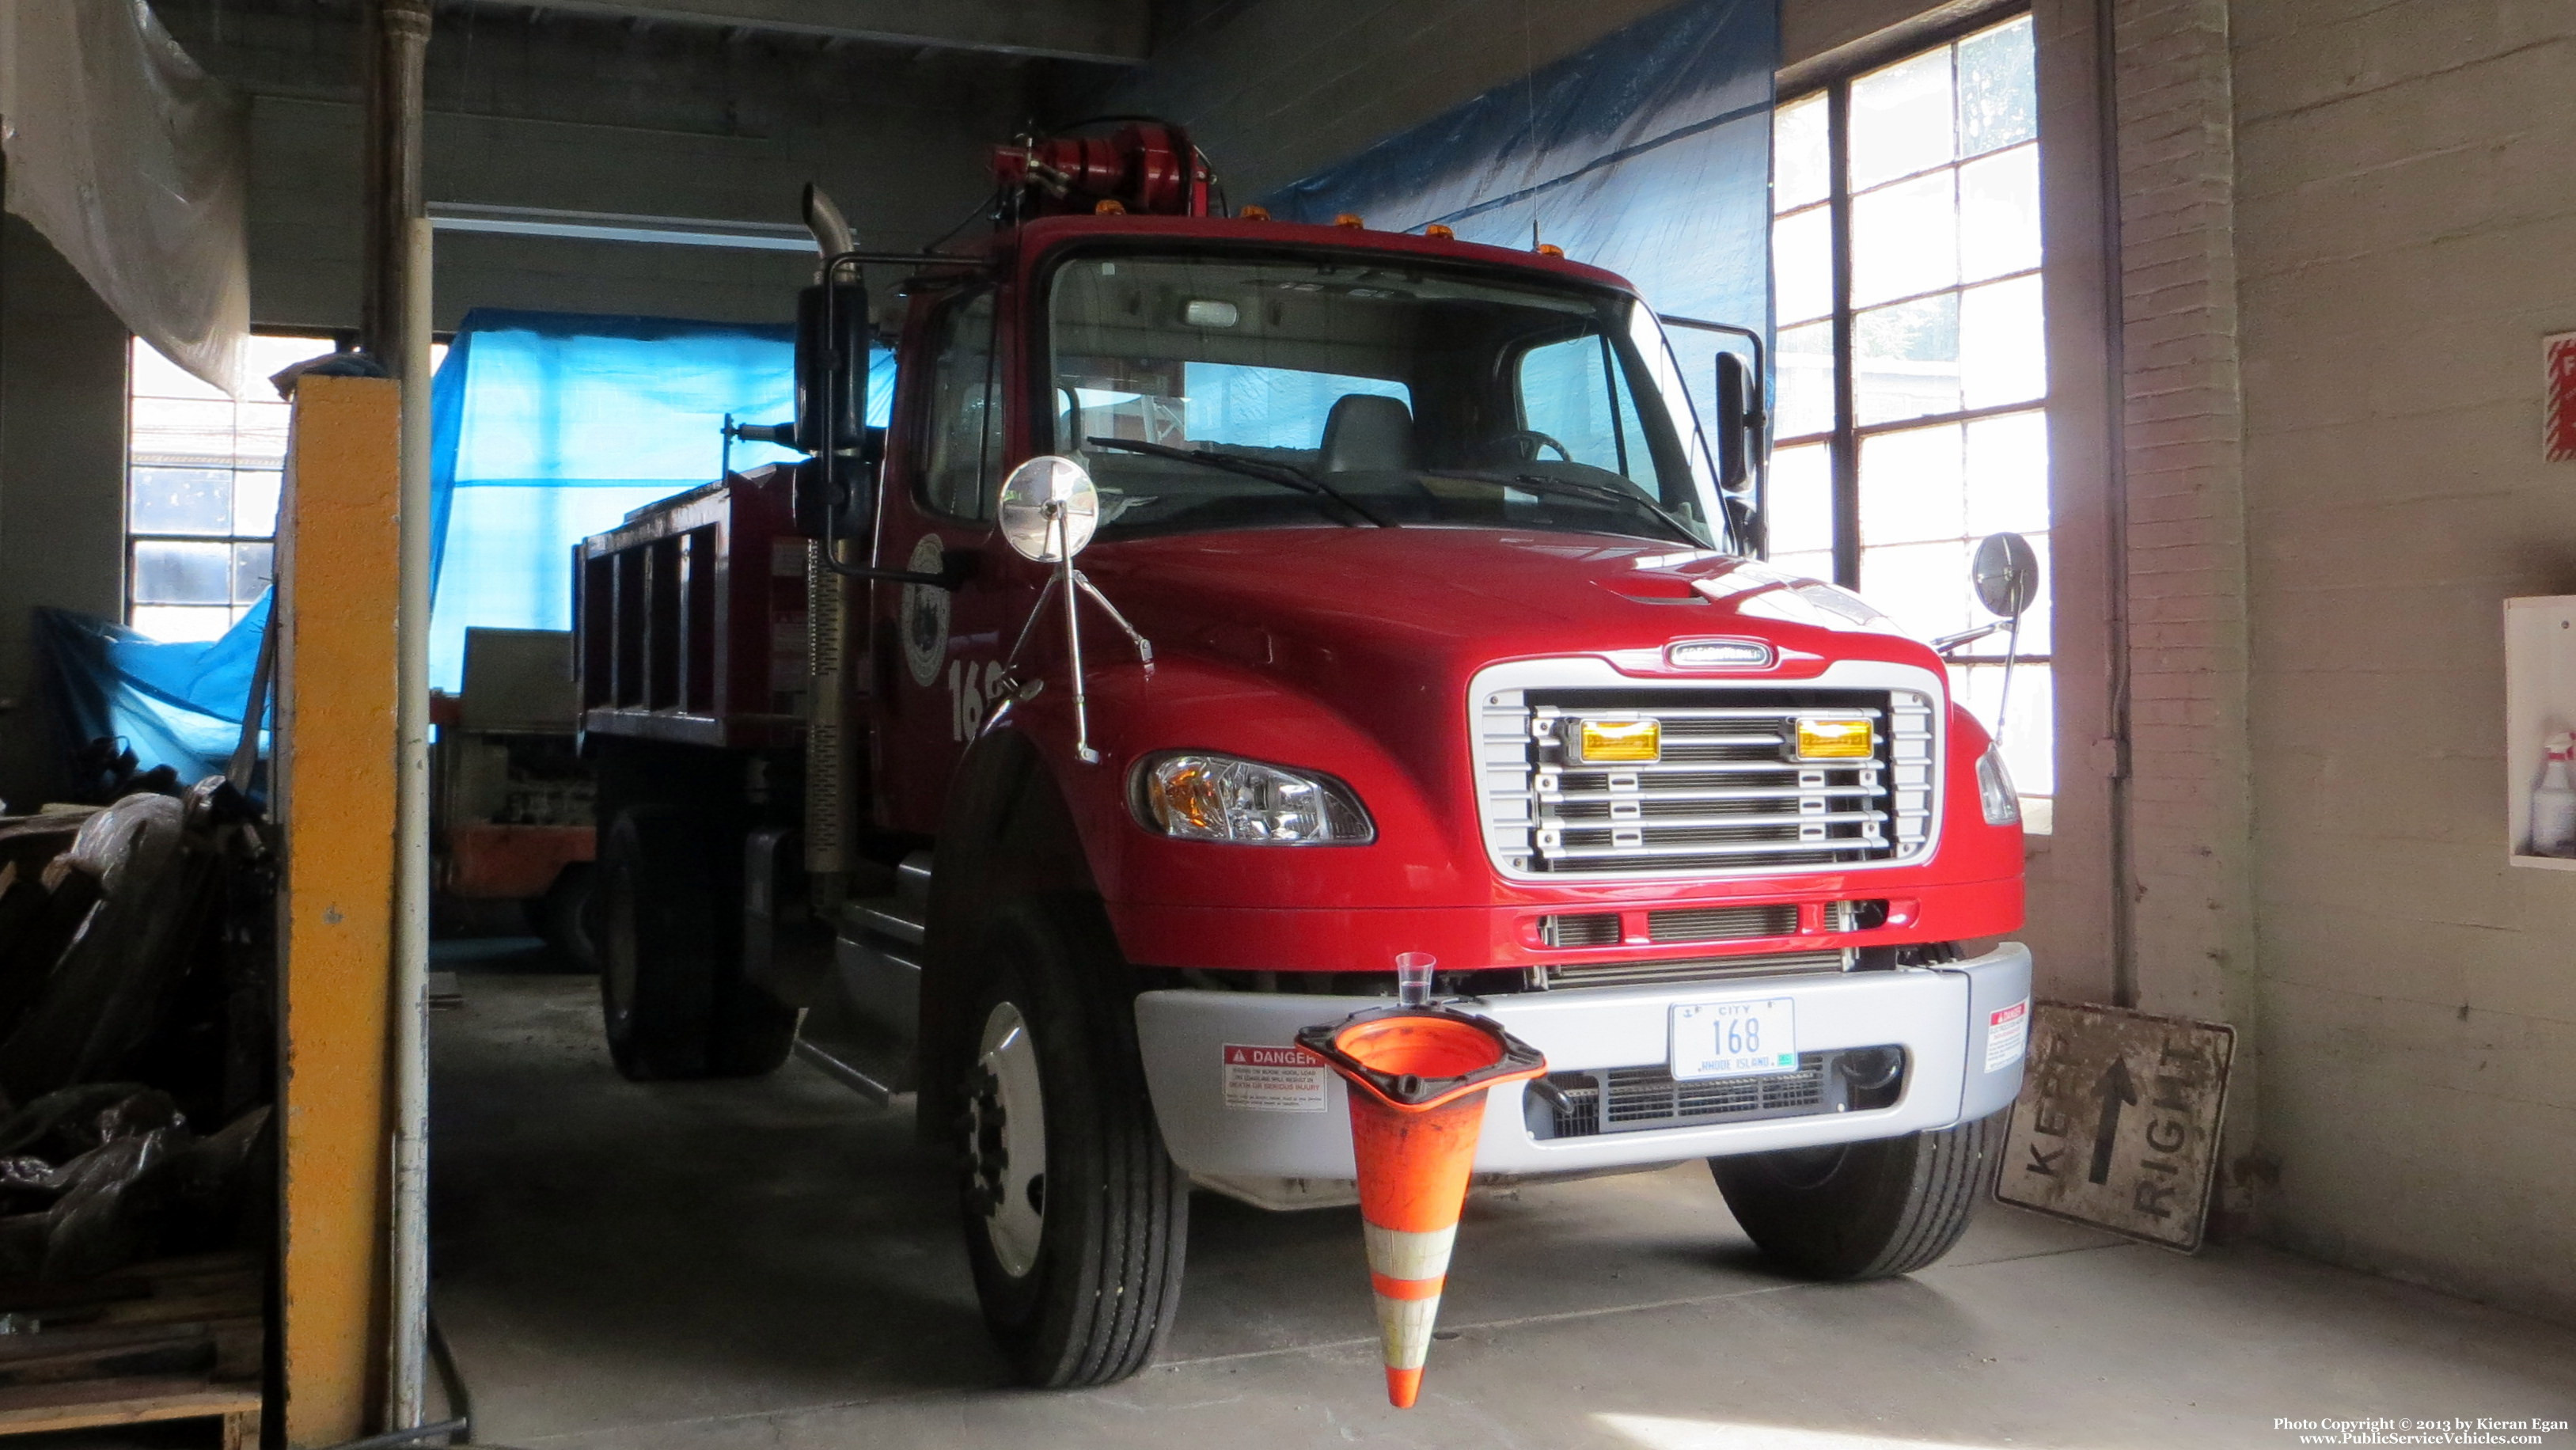 A photo  of Providence Sewer Division
            Truck 168, a 2005-2012 Freightliner             taken by Kieran Egan